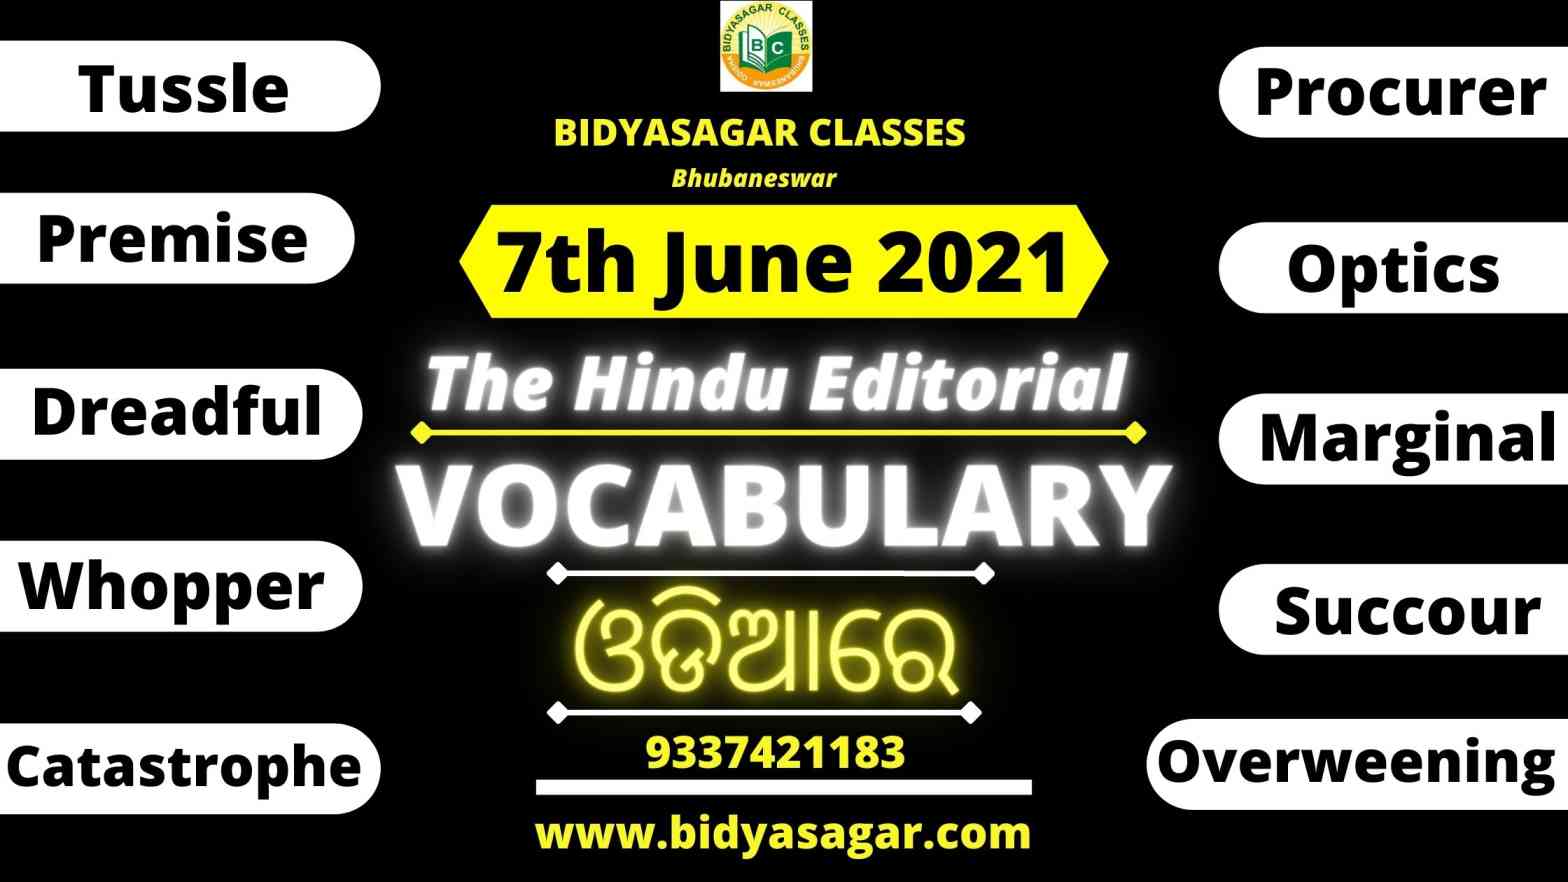 The Hindu Editorial Vocabulary of 7th June 2021